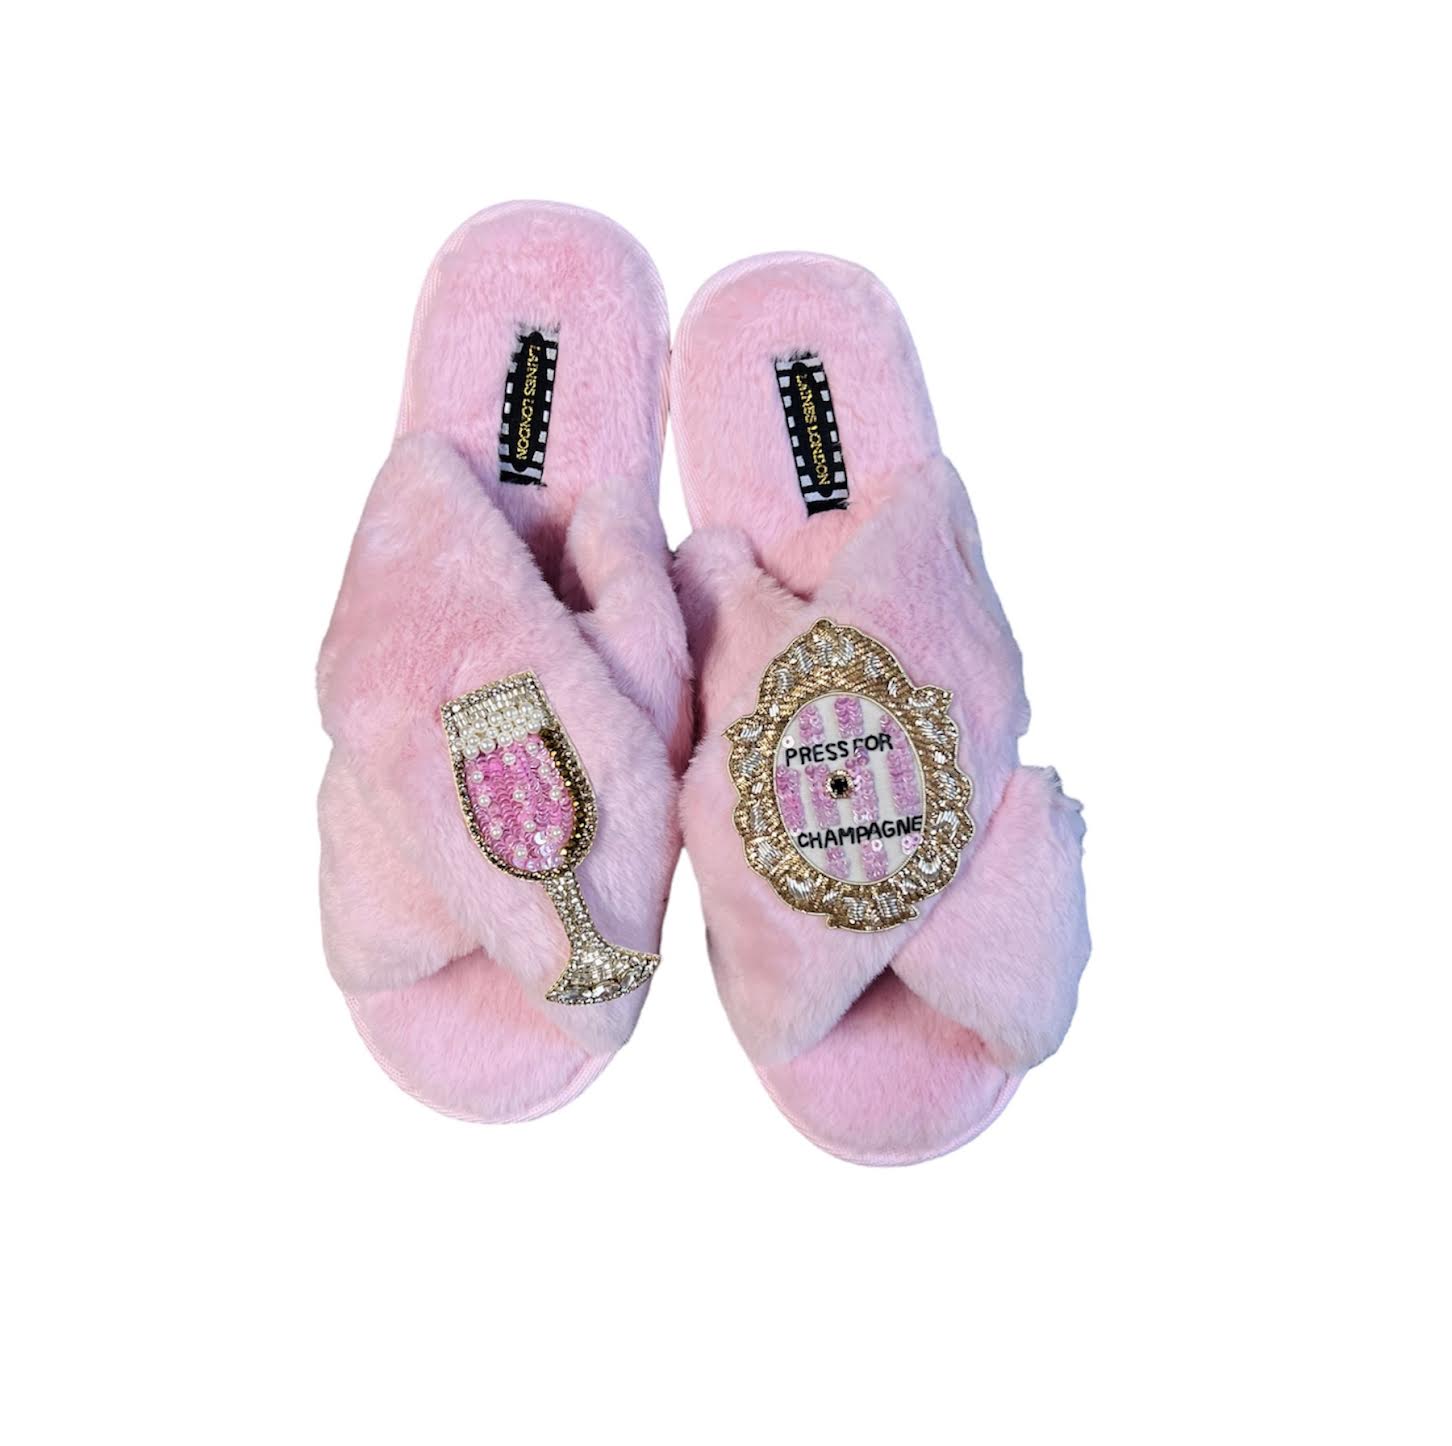 PRESS FOR CHAMPAGNE PINK FURRY SLIPPERS